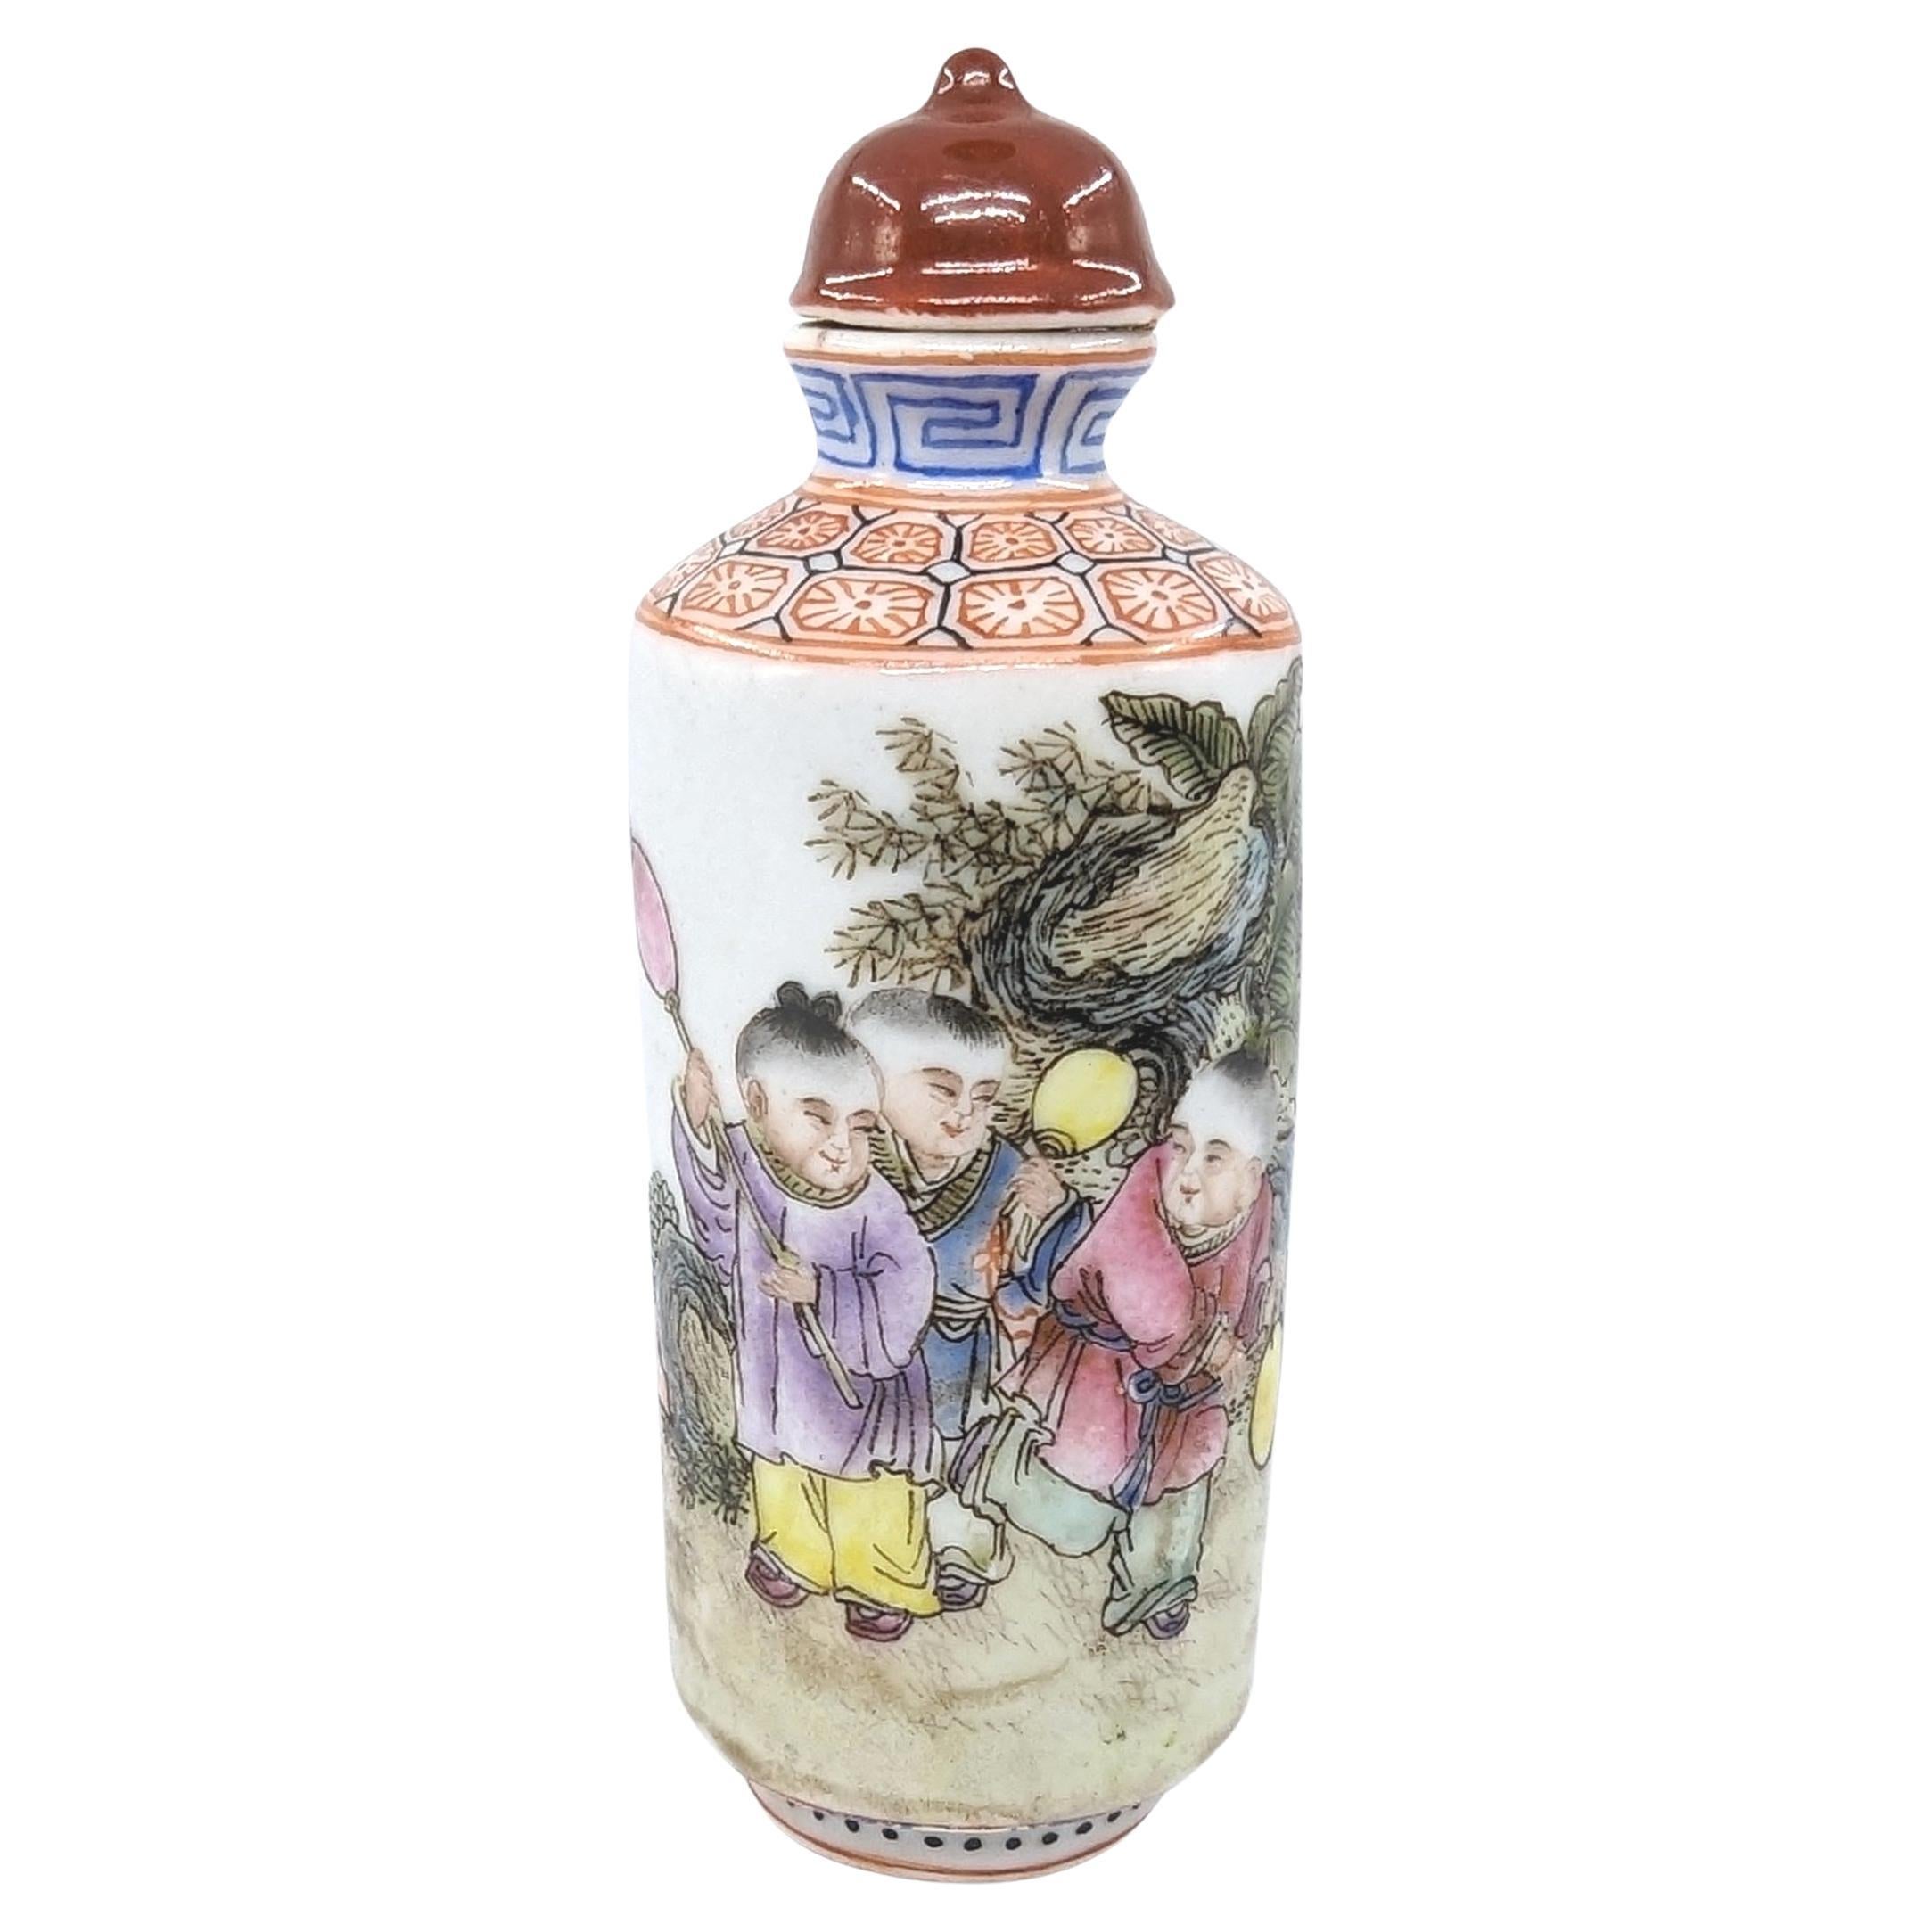 Antique Chinese poly-chrome fencai  porcelain snuff bottle in cylindrical form, finely decorated with 3 boys in a garden scene with poetic versus in calligraphy, with seeded cell patterns to shoulder, and red four character  Guangxu mark to base